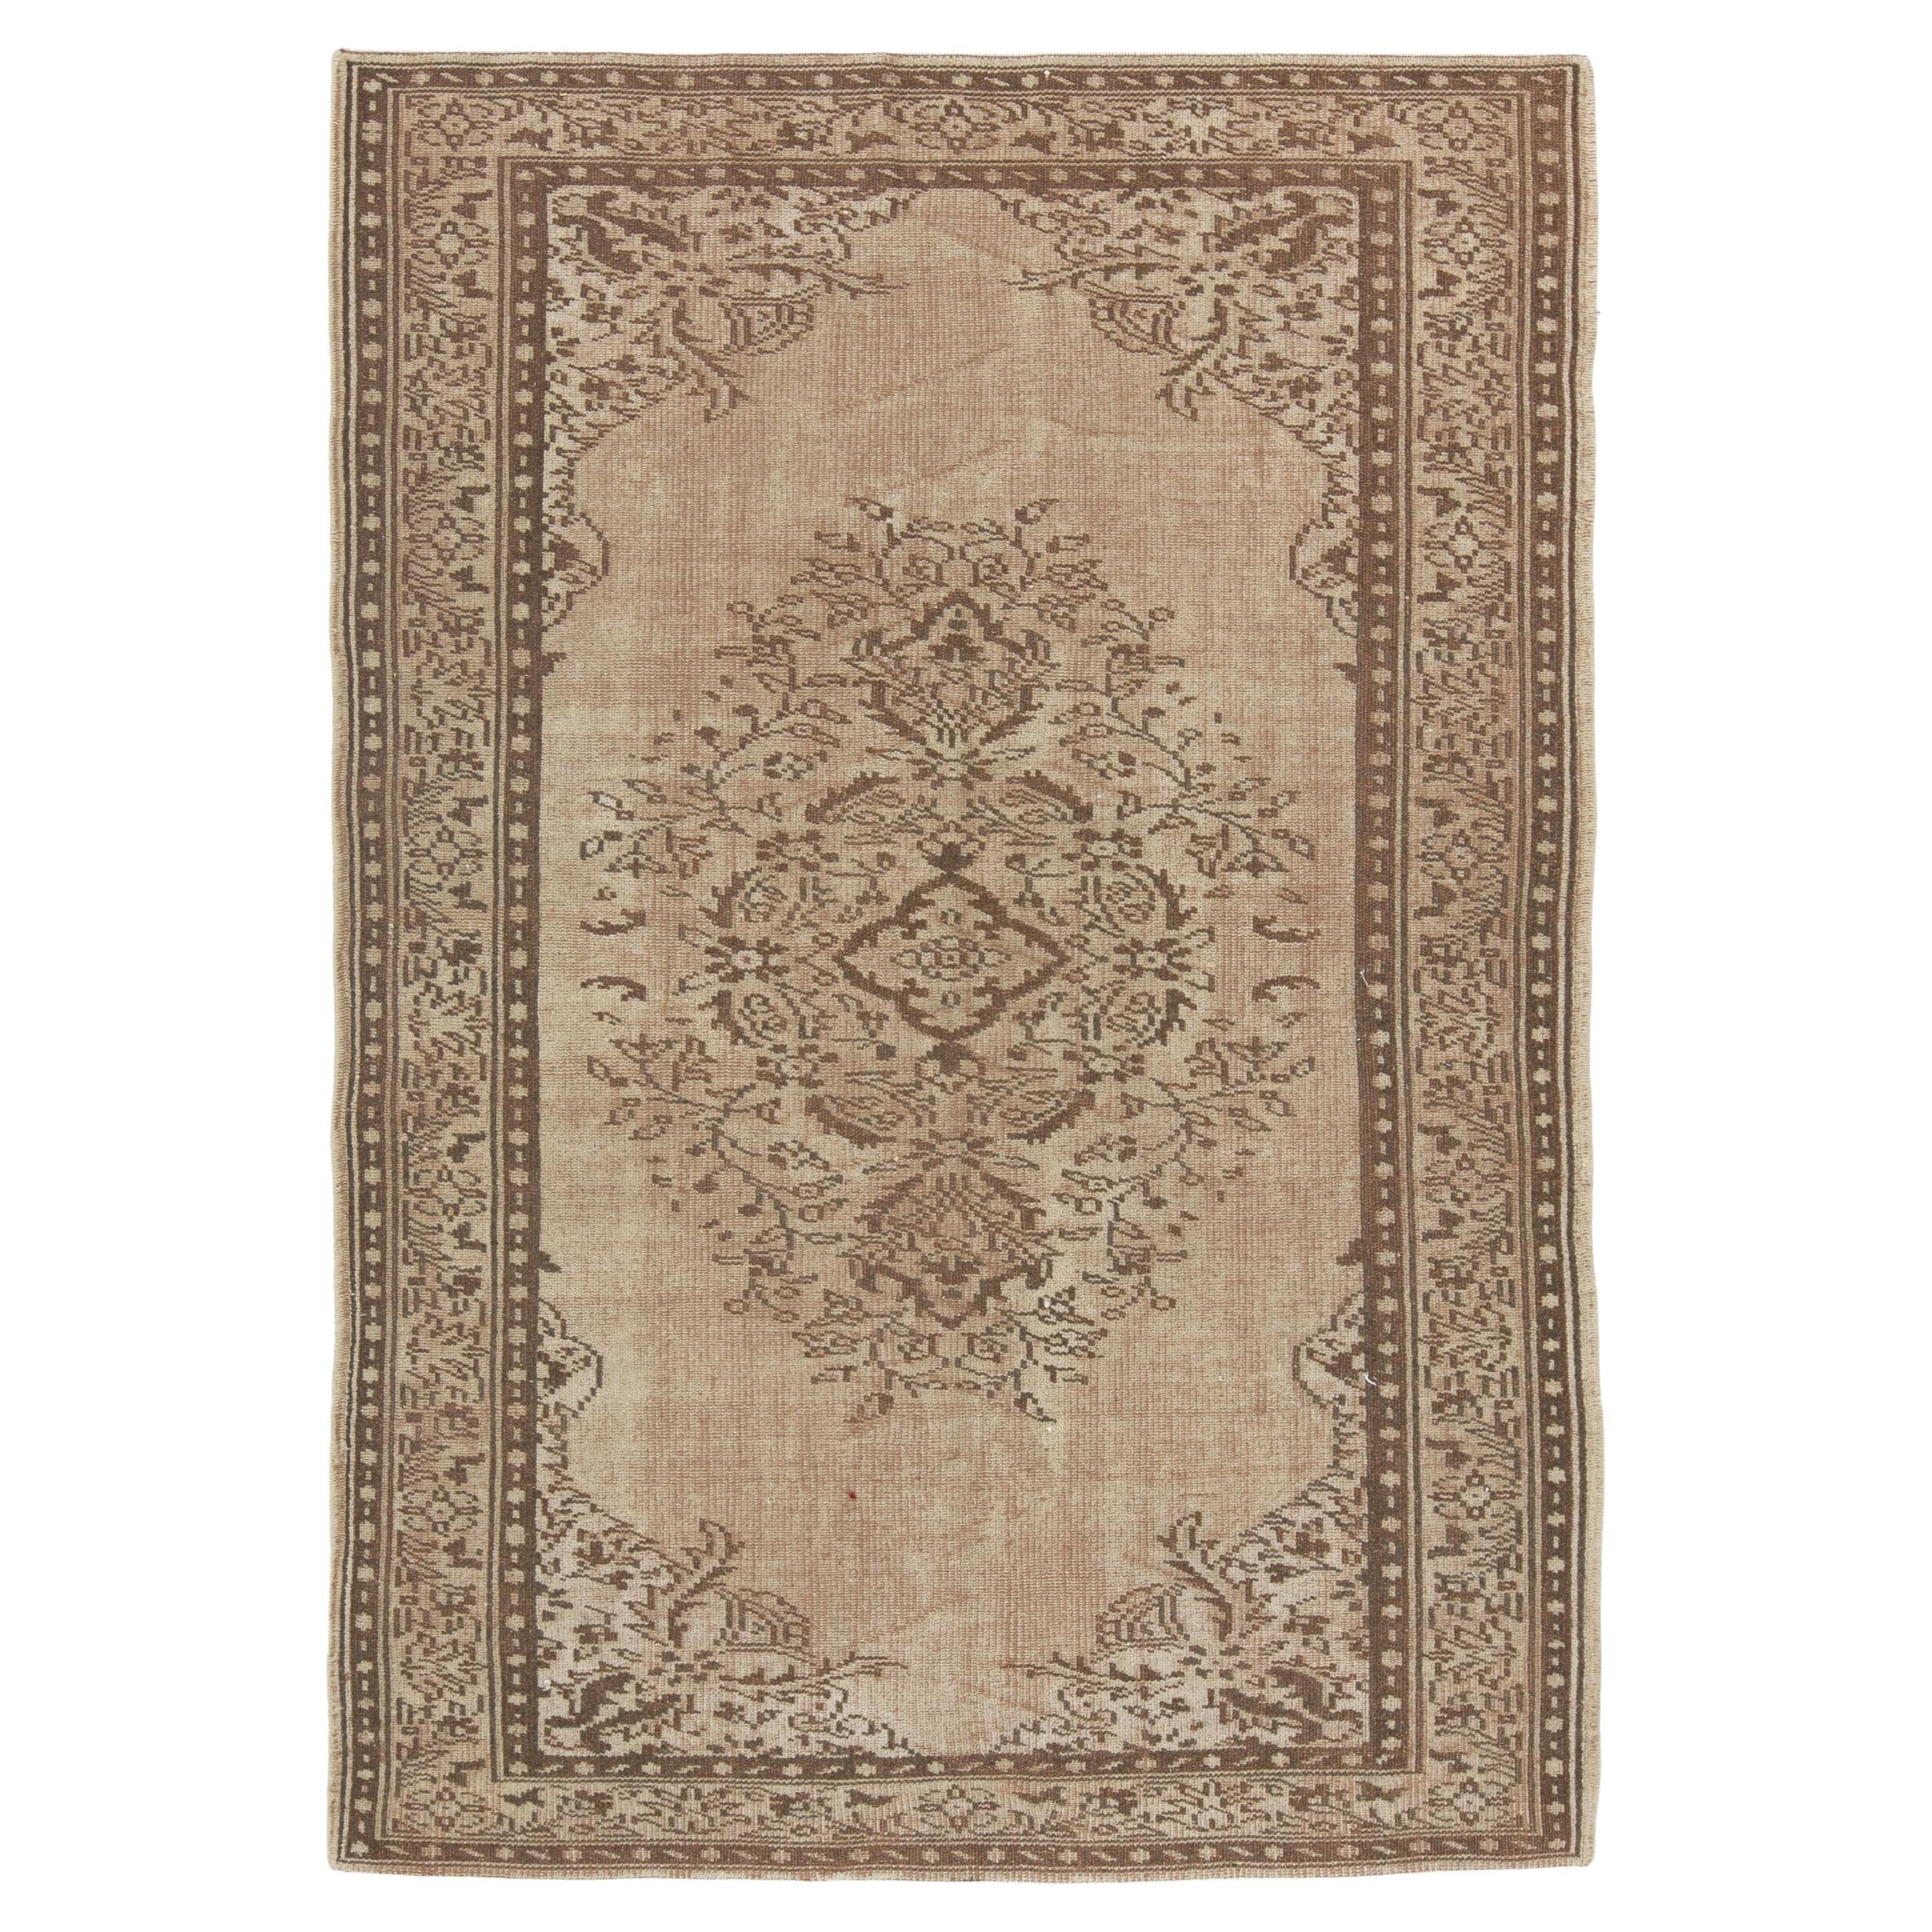 5.4x7.8 Ft Hand-Knotted Vintage Central Anatolian Wool Area Rug in Brown Colors